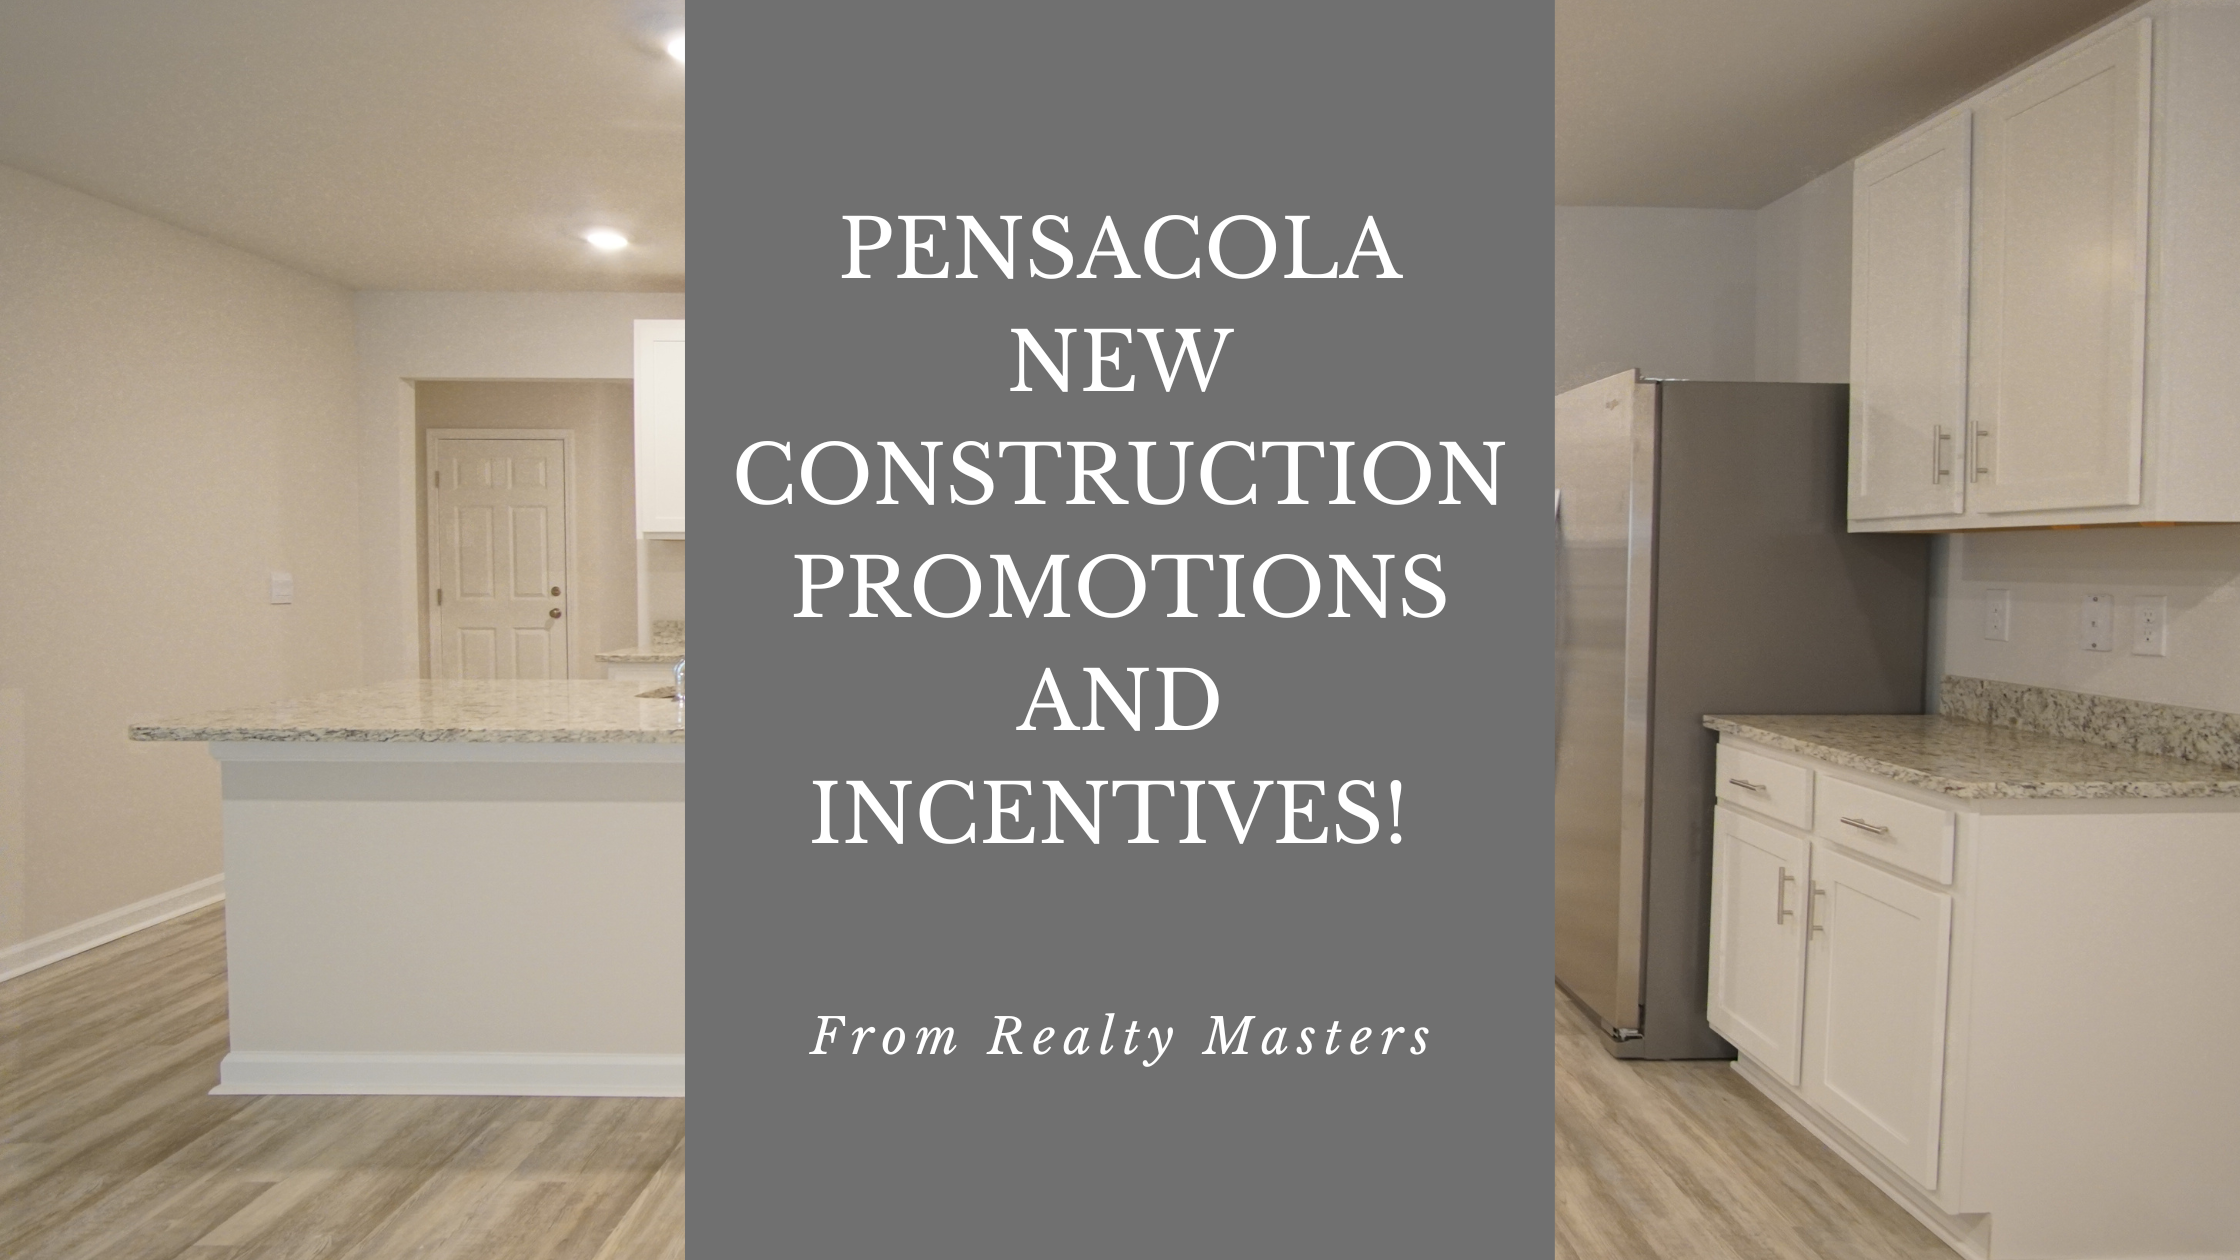 Pensacola New Construction Incentives & Promotions